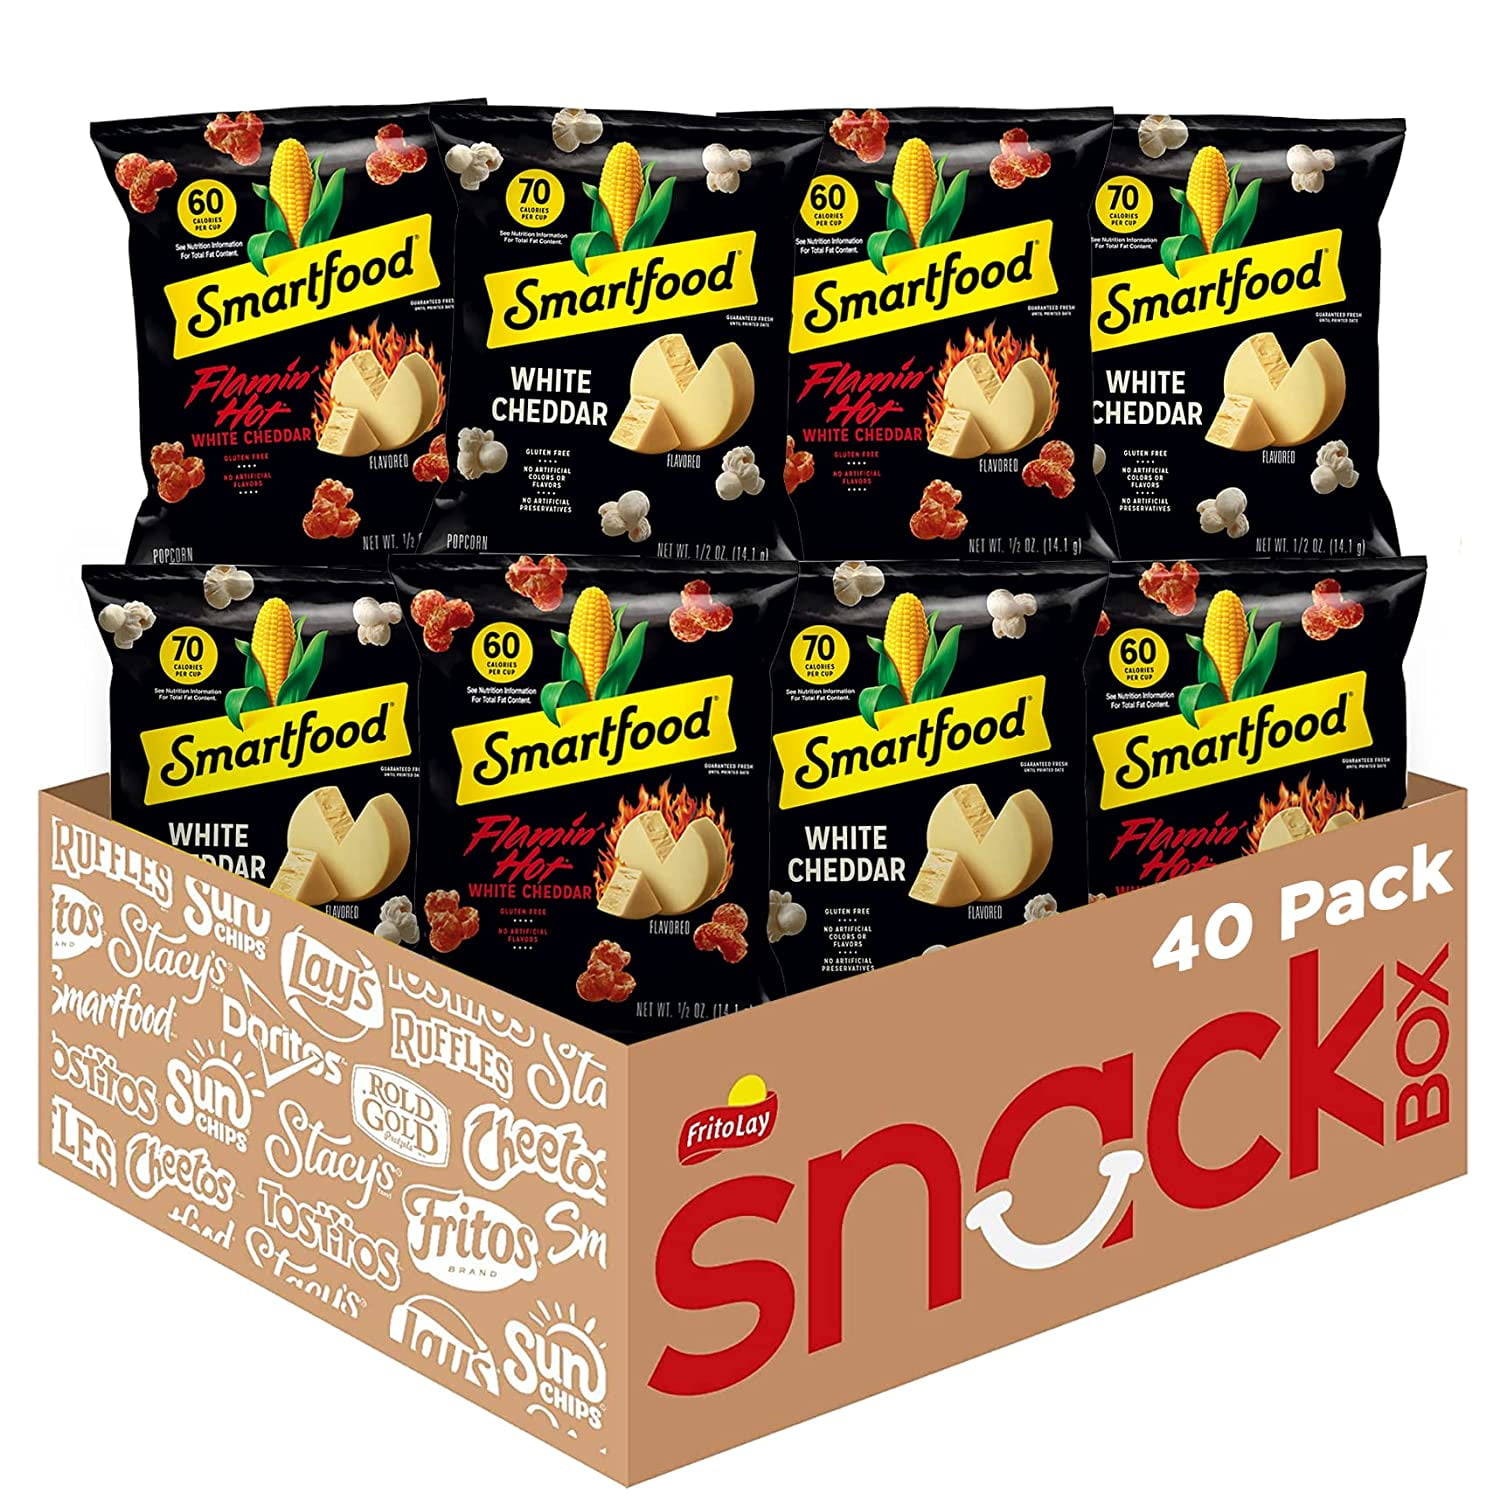 0.5 Ounce Smartfood Popcorn Variety Pack Pack of 40 